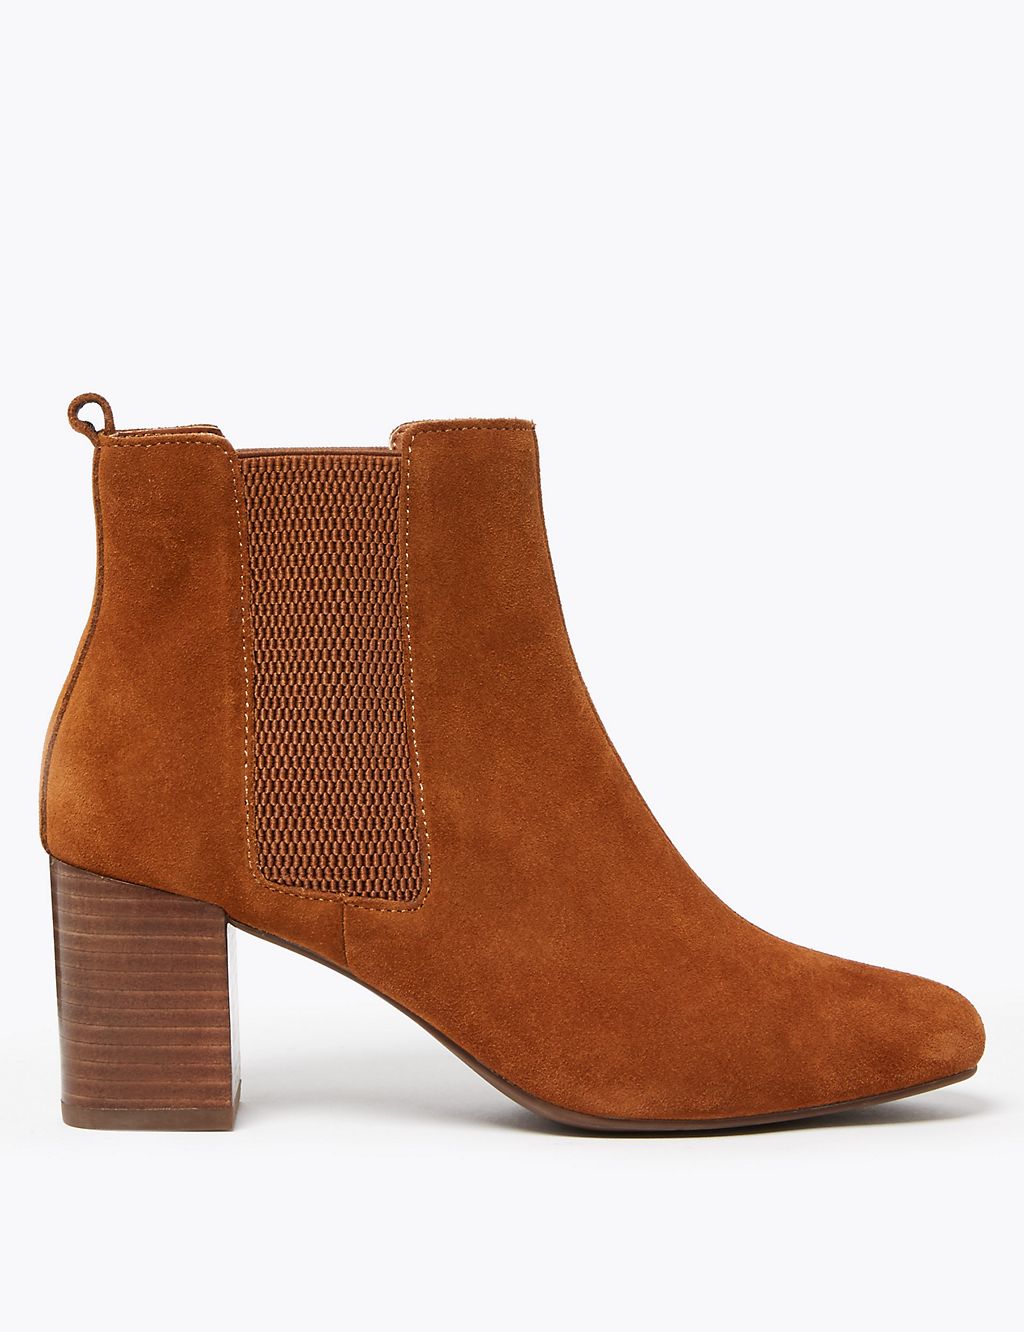 Suede Almond Toe Ankle Boots 1 of 5